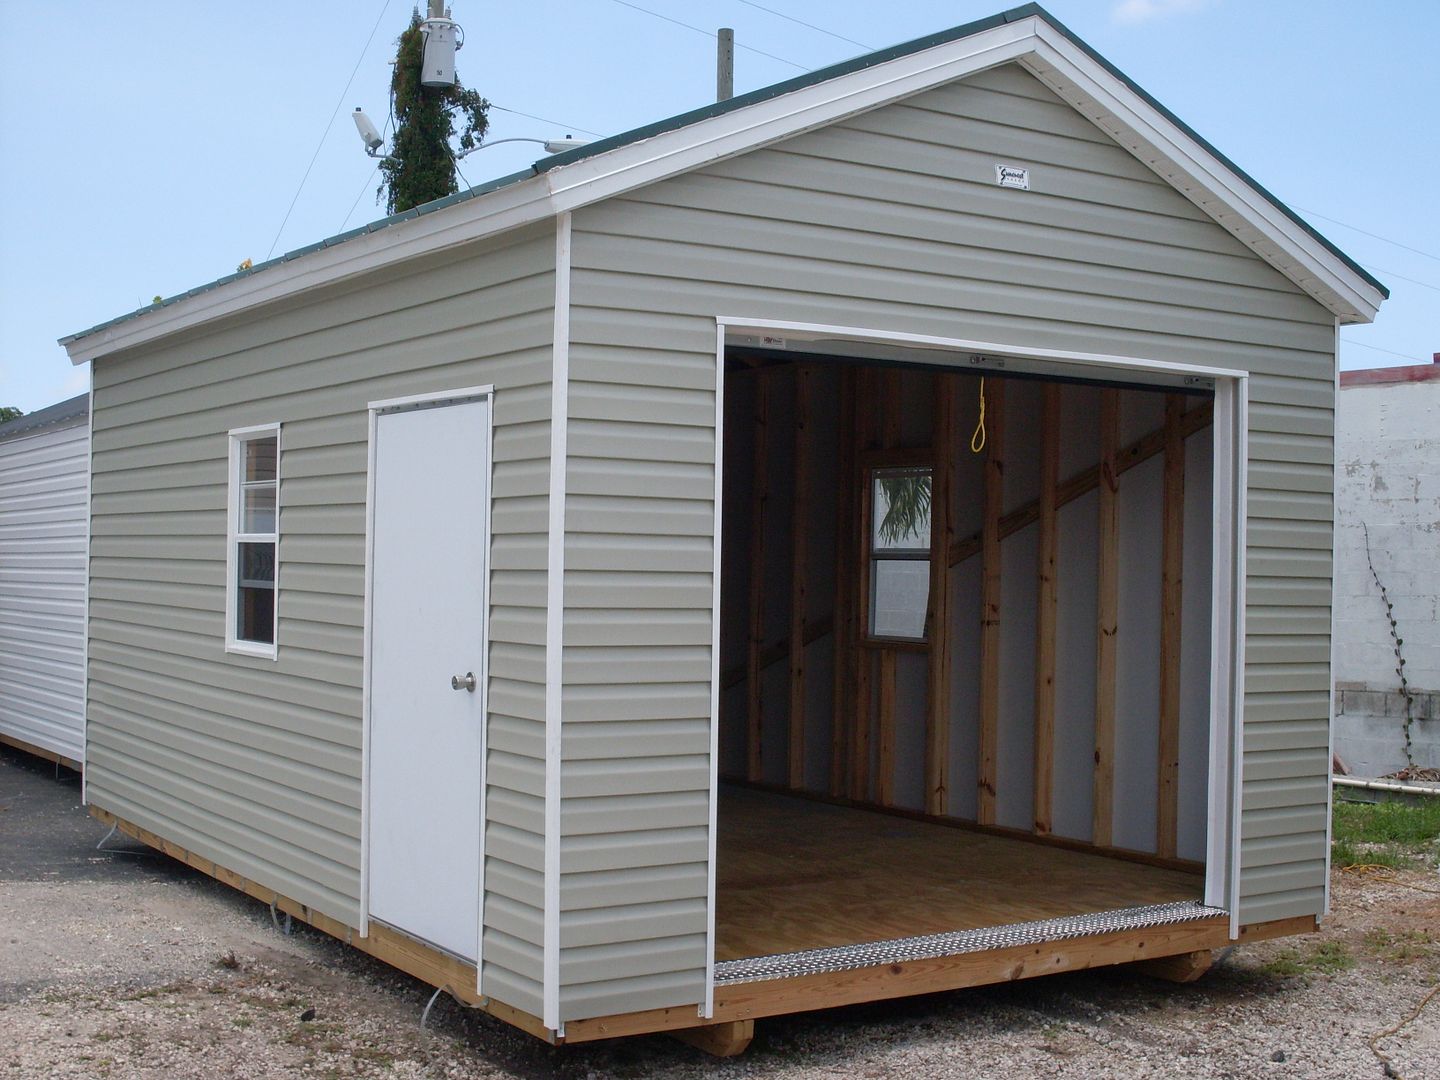 County and State CERTIFIED SHEDS FOR SALE - Hurricane resistant, miami